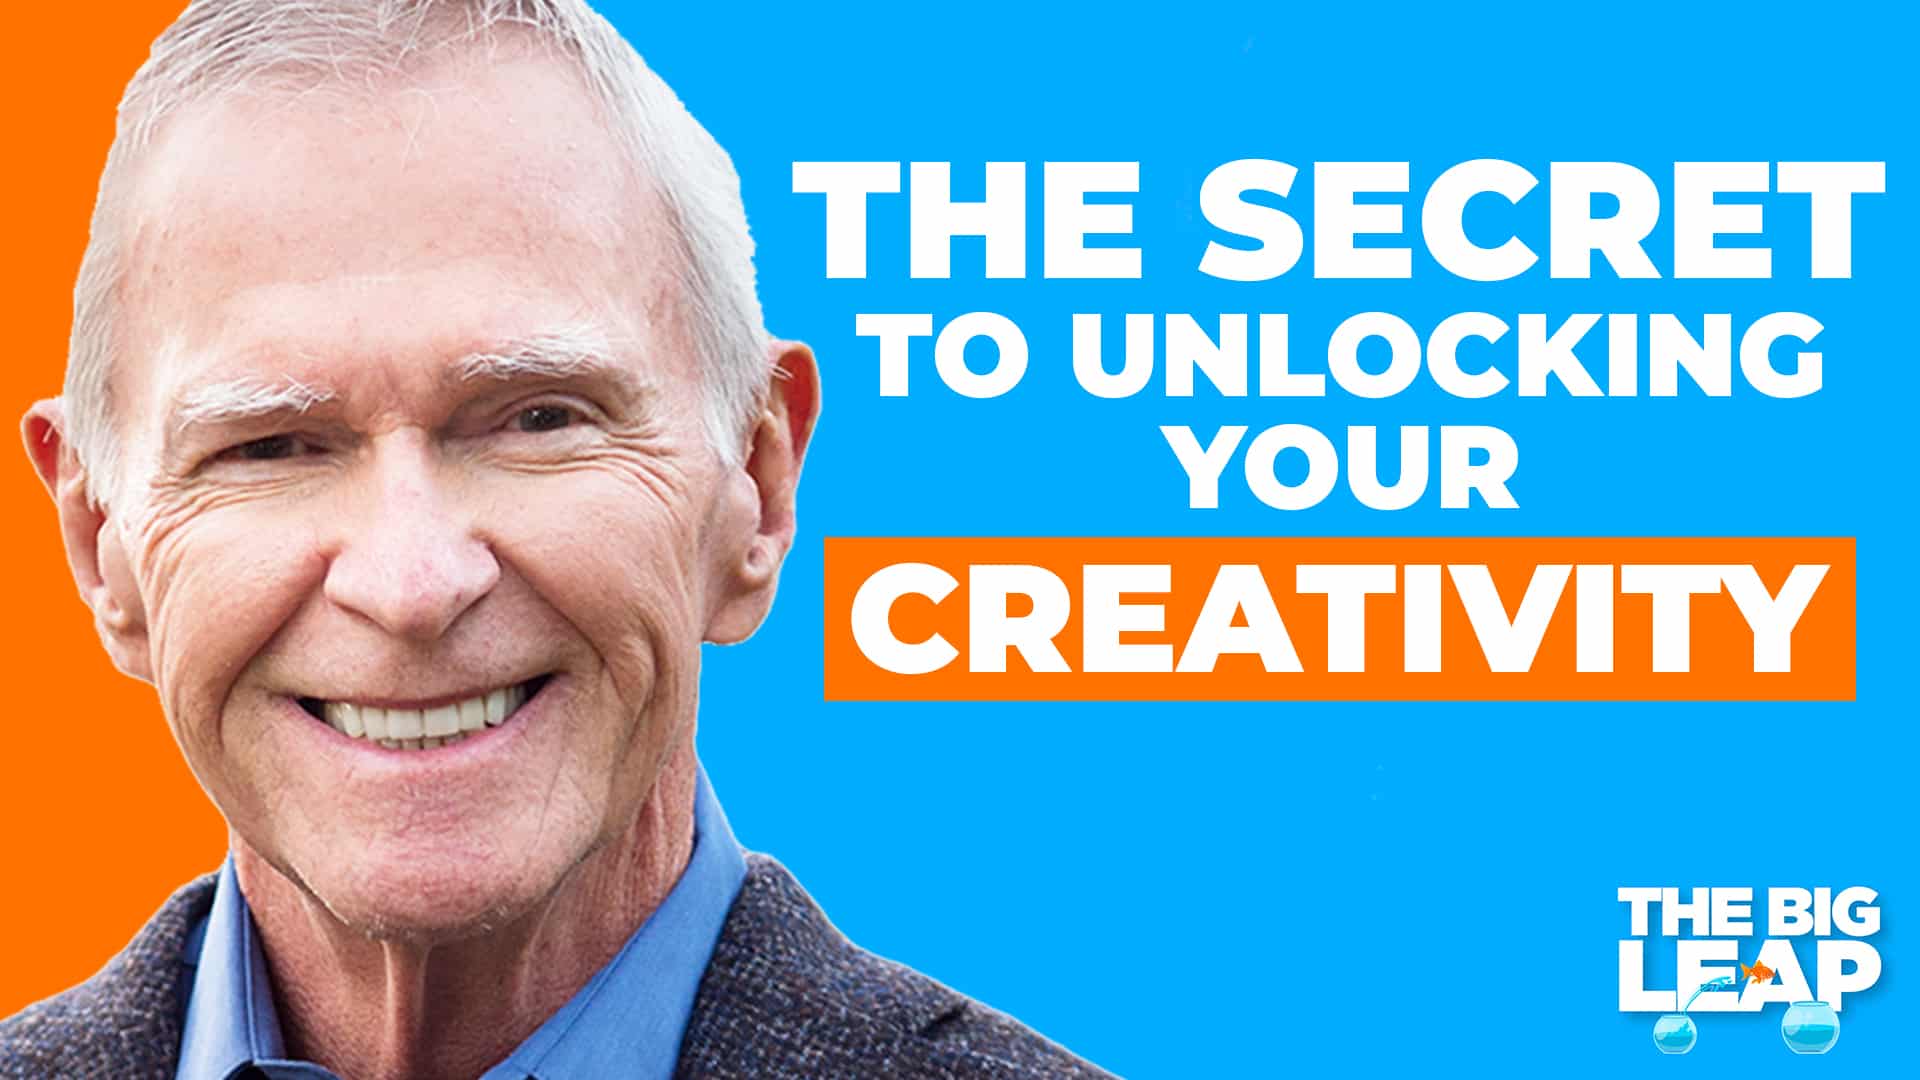 The Big Leap Episode 76 Cover Photo showing a photo of Gay Hendricks and the words "The Secret to Unlocking Your Creativity."